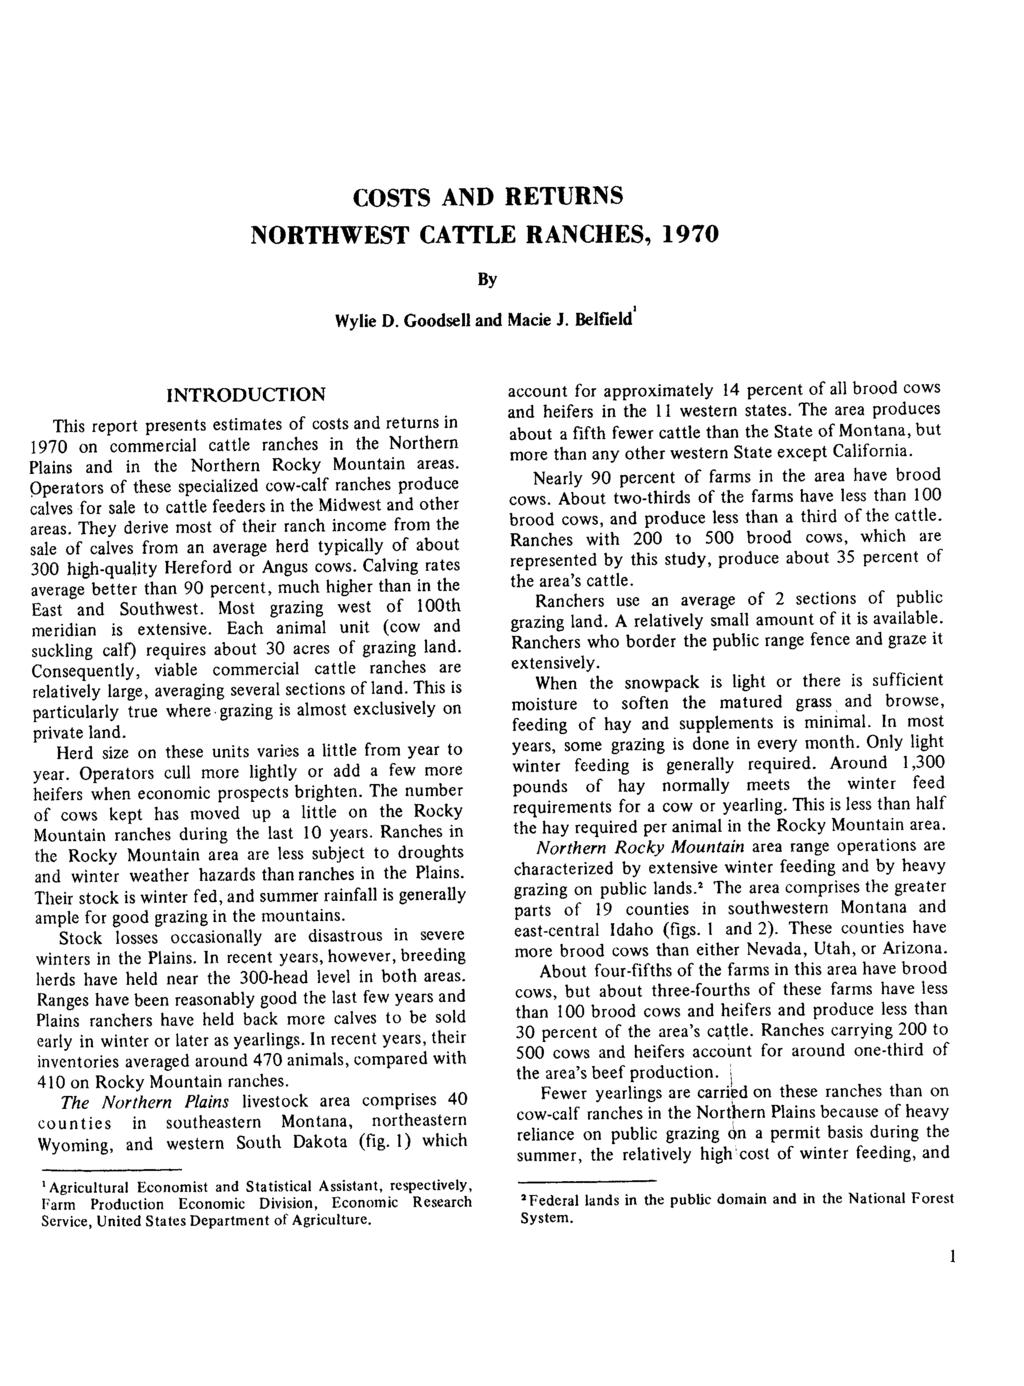 COSTS AND RETURNS NORTHWEST CATTLE RANCHES, 1970 By Wylie D. Goodsell and Macie J.